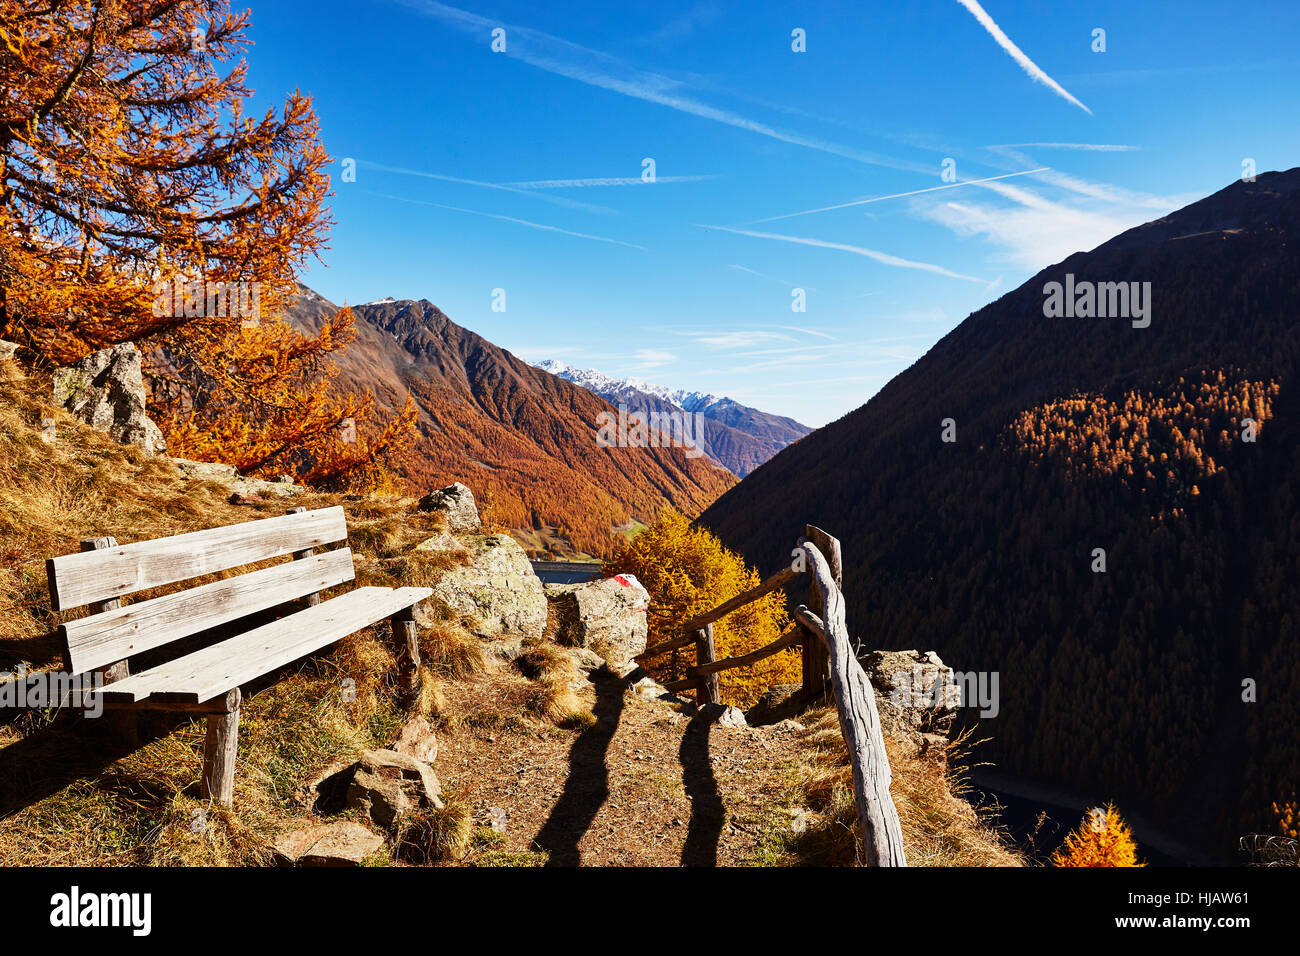 Scenic view, Schnalstal, South Tyrol, Italy Stock Photo